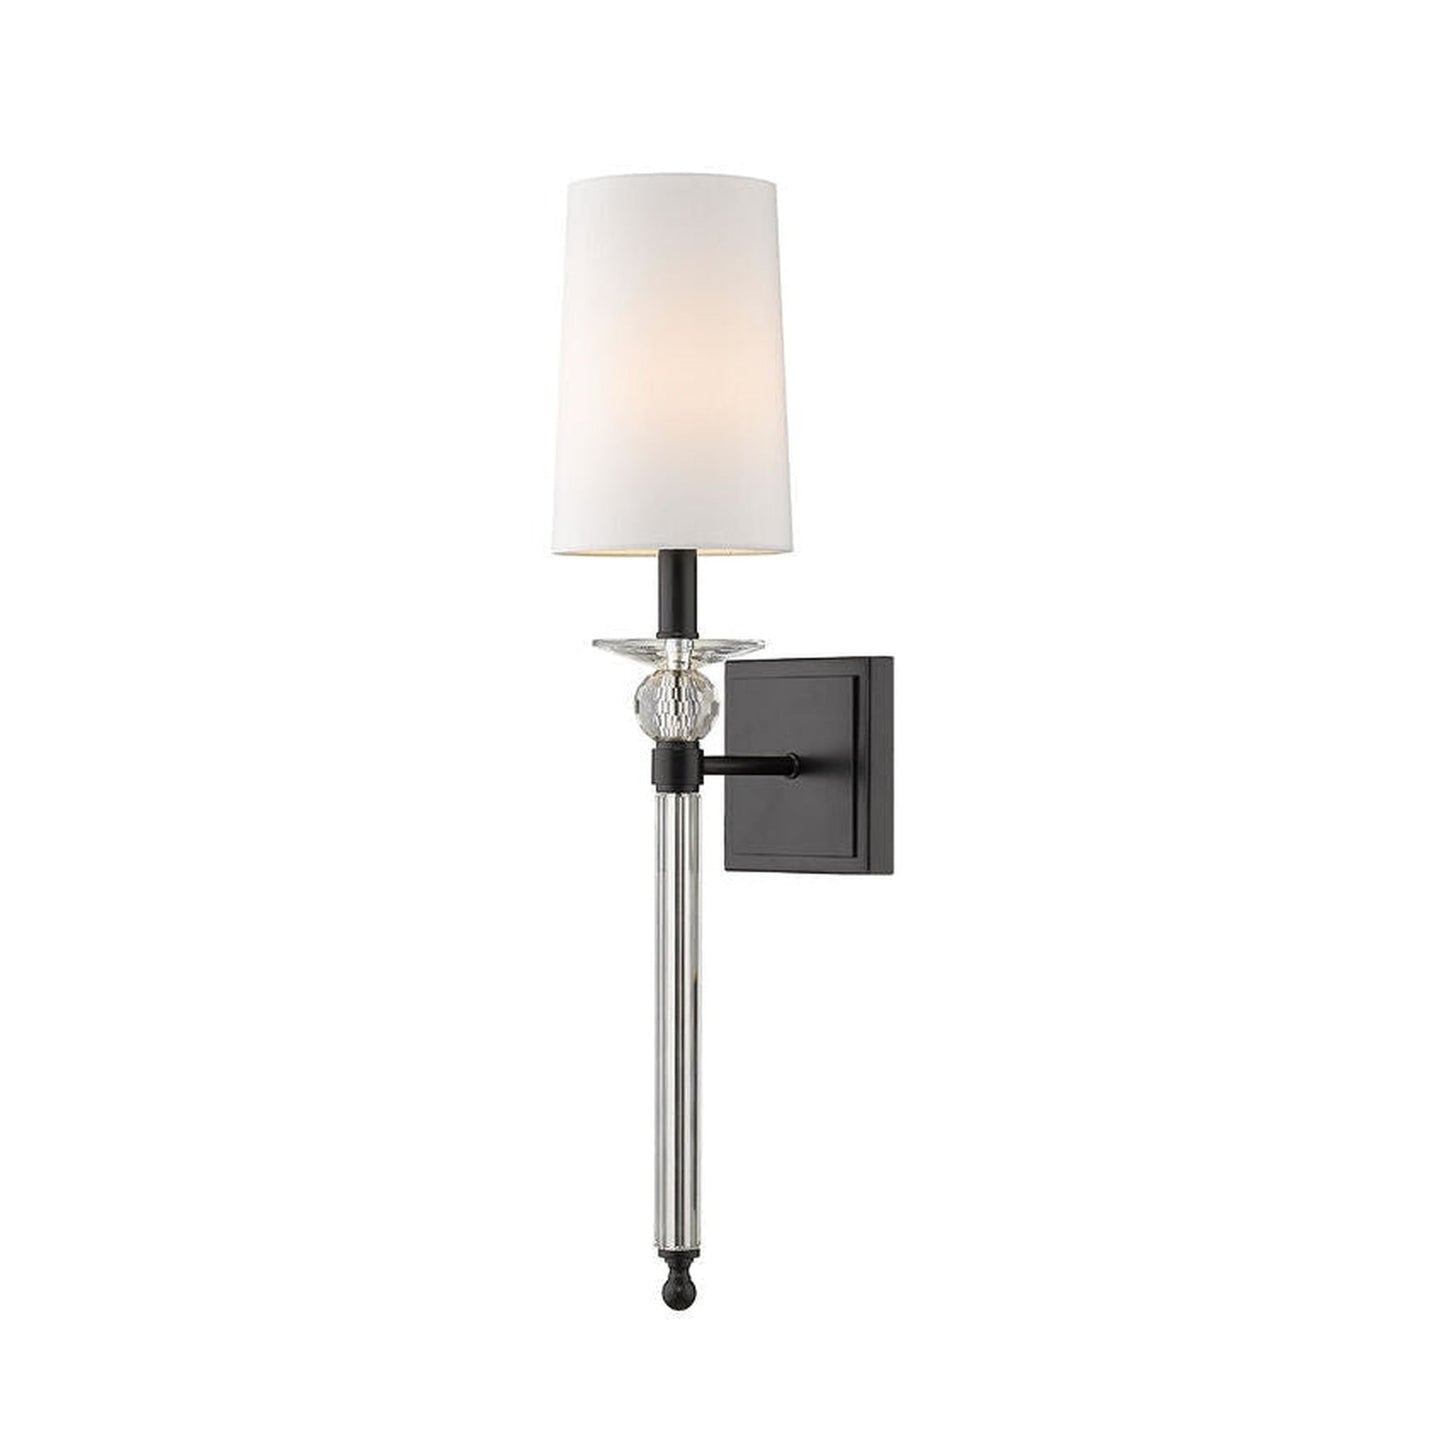 Z-Lite Ava 6" 1-Light Matte Black Wall Sconce With White Fabric Shade